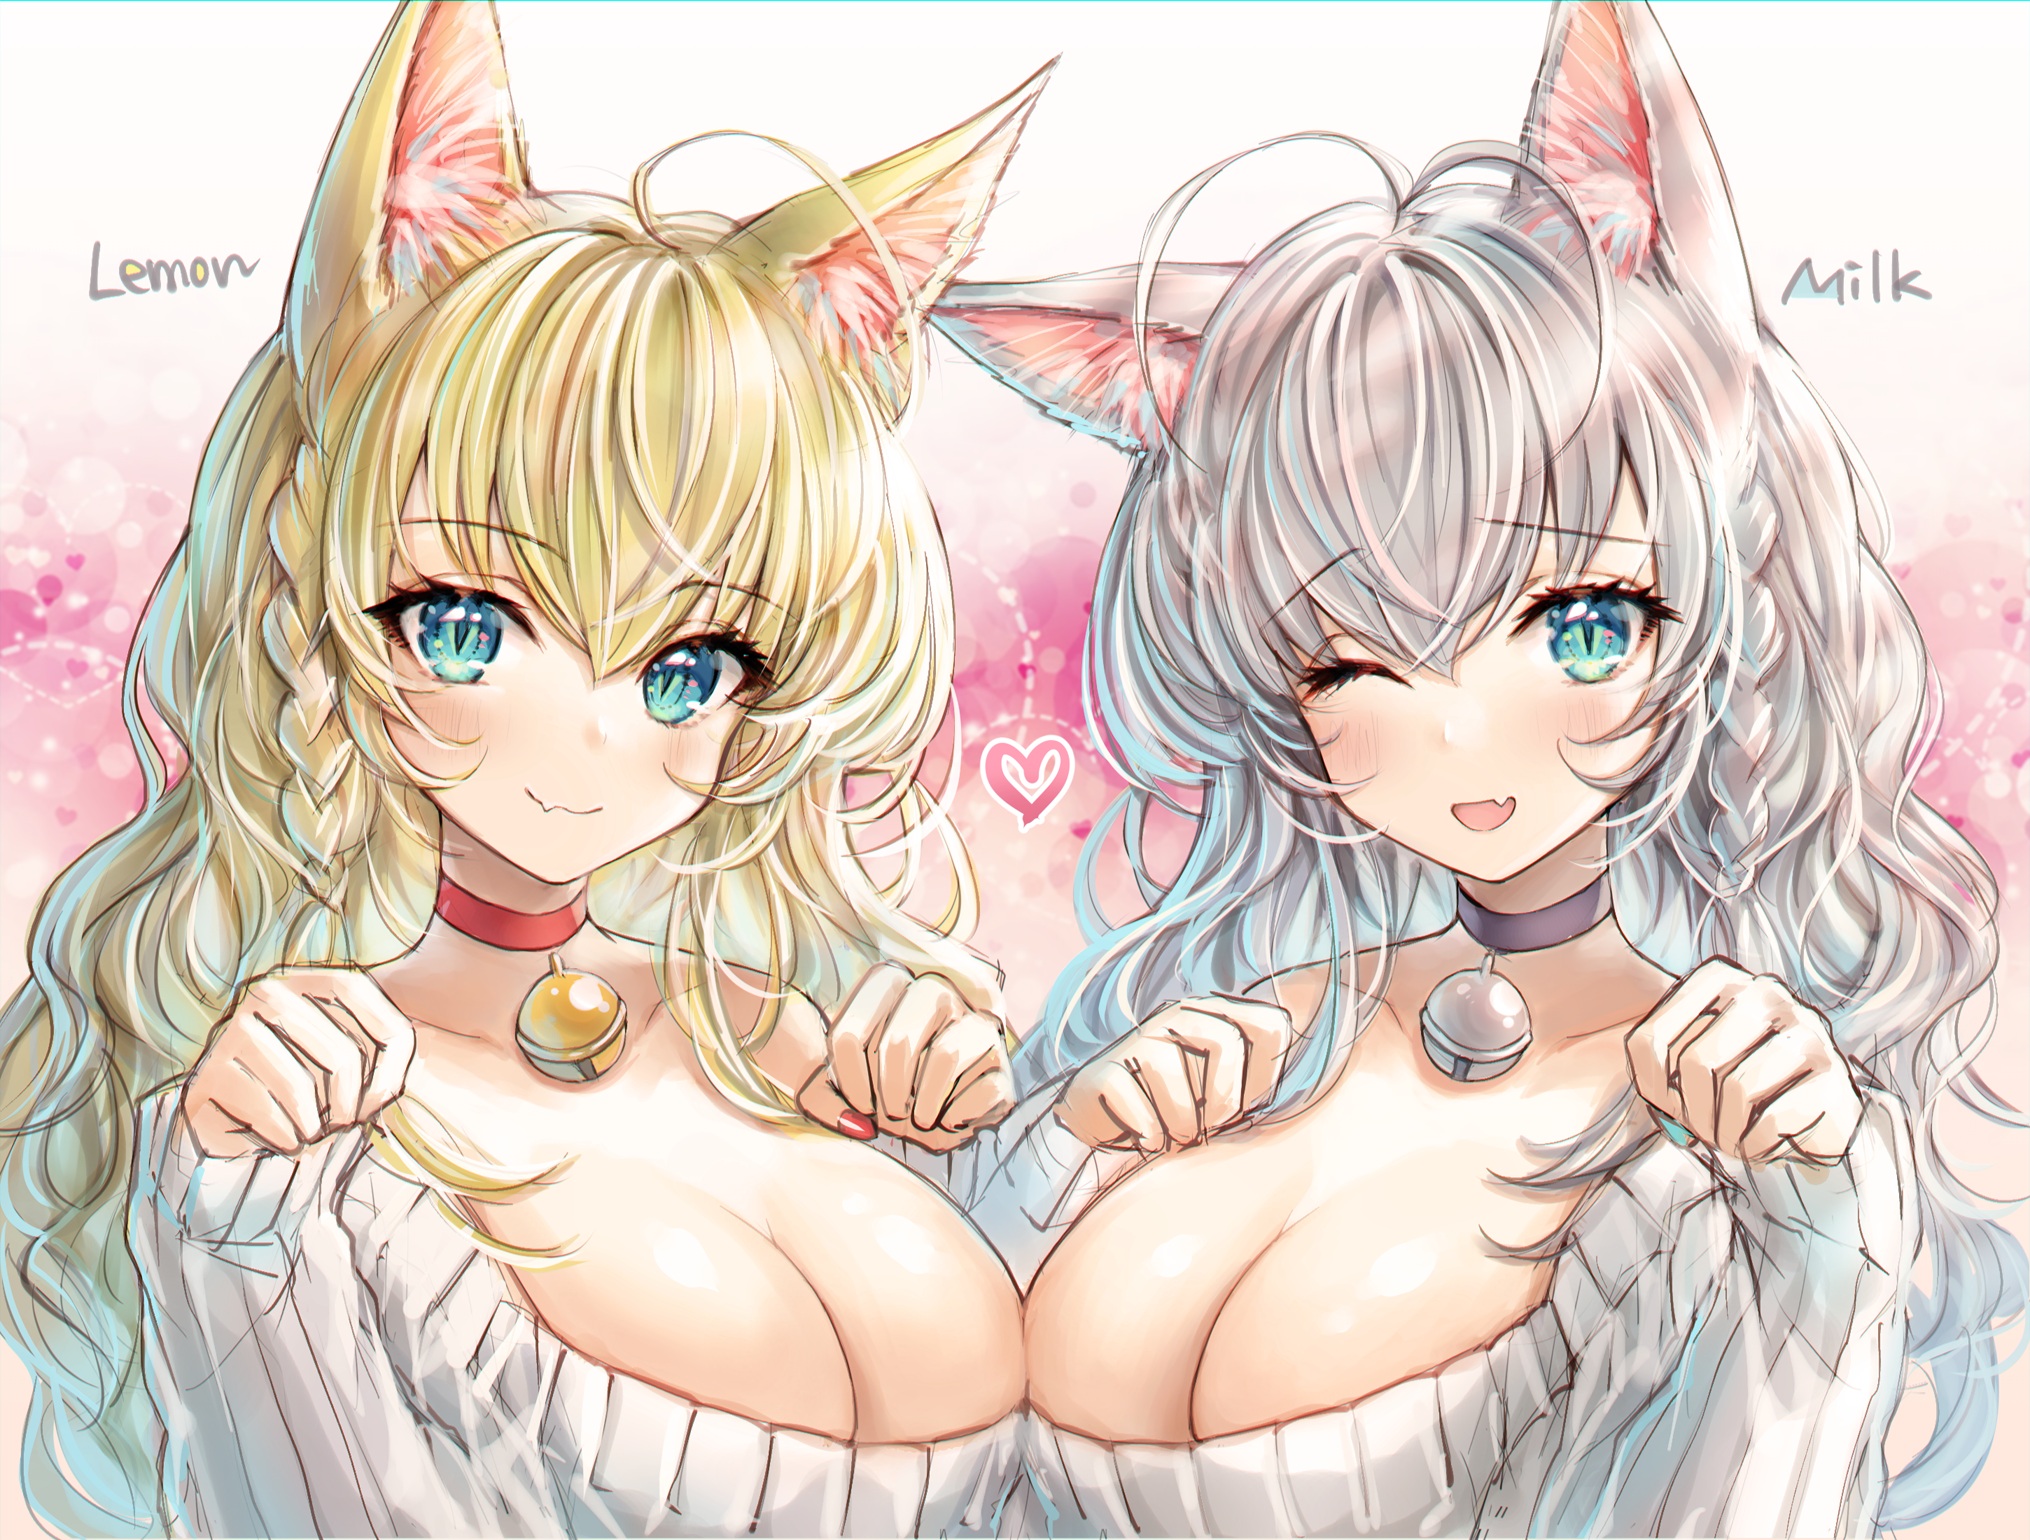 Anime 2030x1540 anime girls two women boobs cat girl blue eyes animal ears blonde silver hair sweater cleavage artwork Shannon